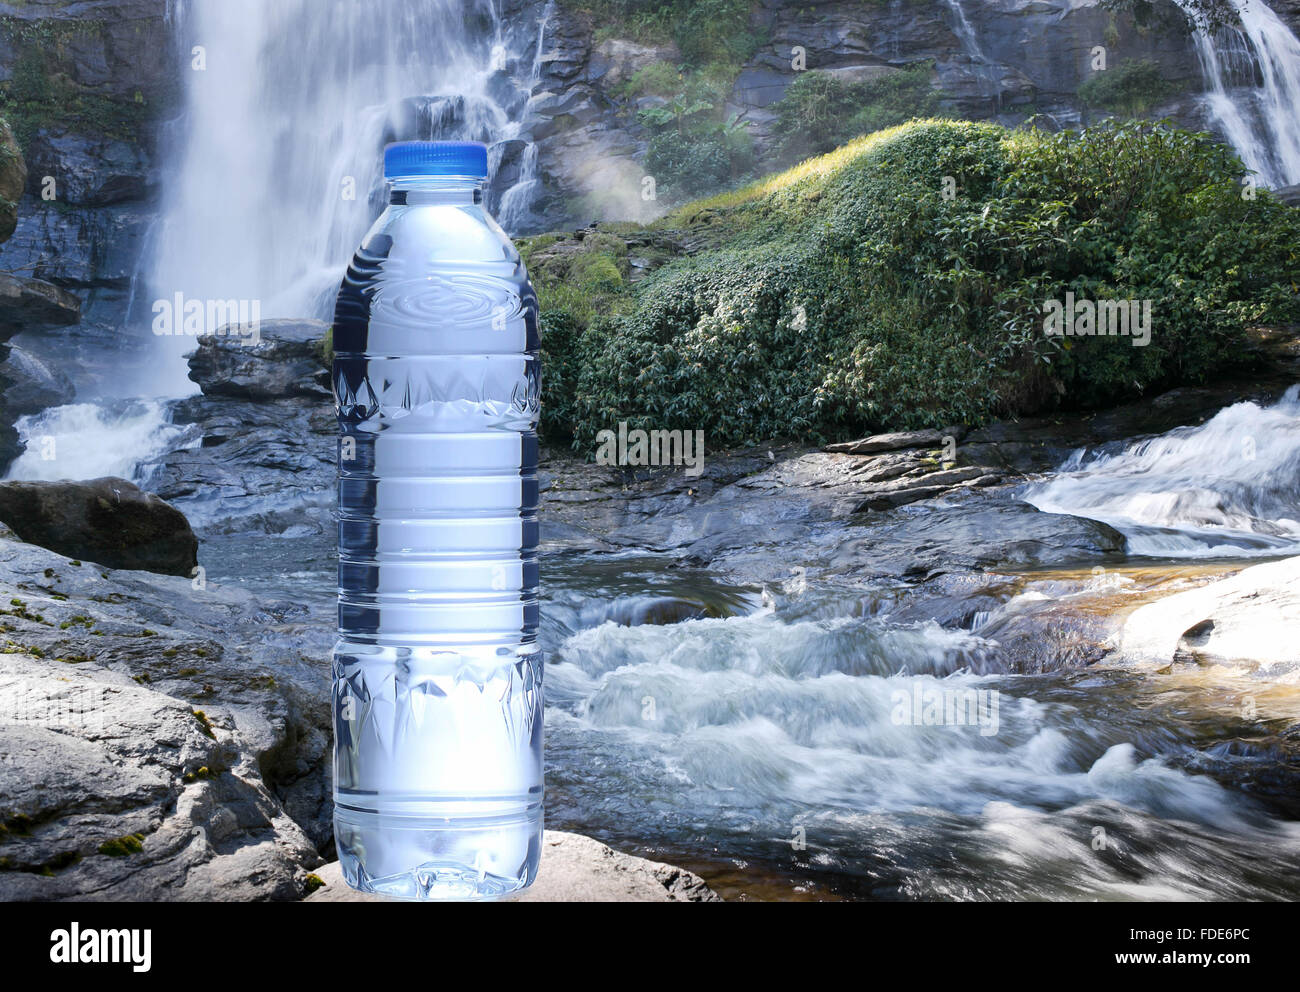 https://c8.alamy.com/comp/FDE6PC/bottle-of-fresh-mineral-water-with-waterfalls-in-background-FDE6PC.jpg